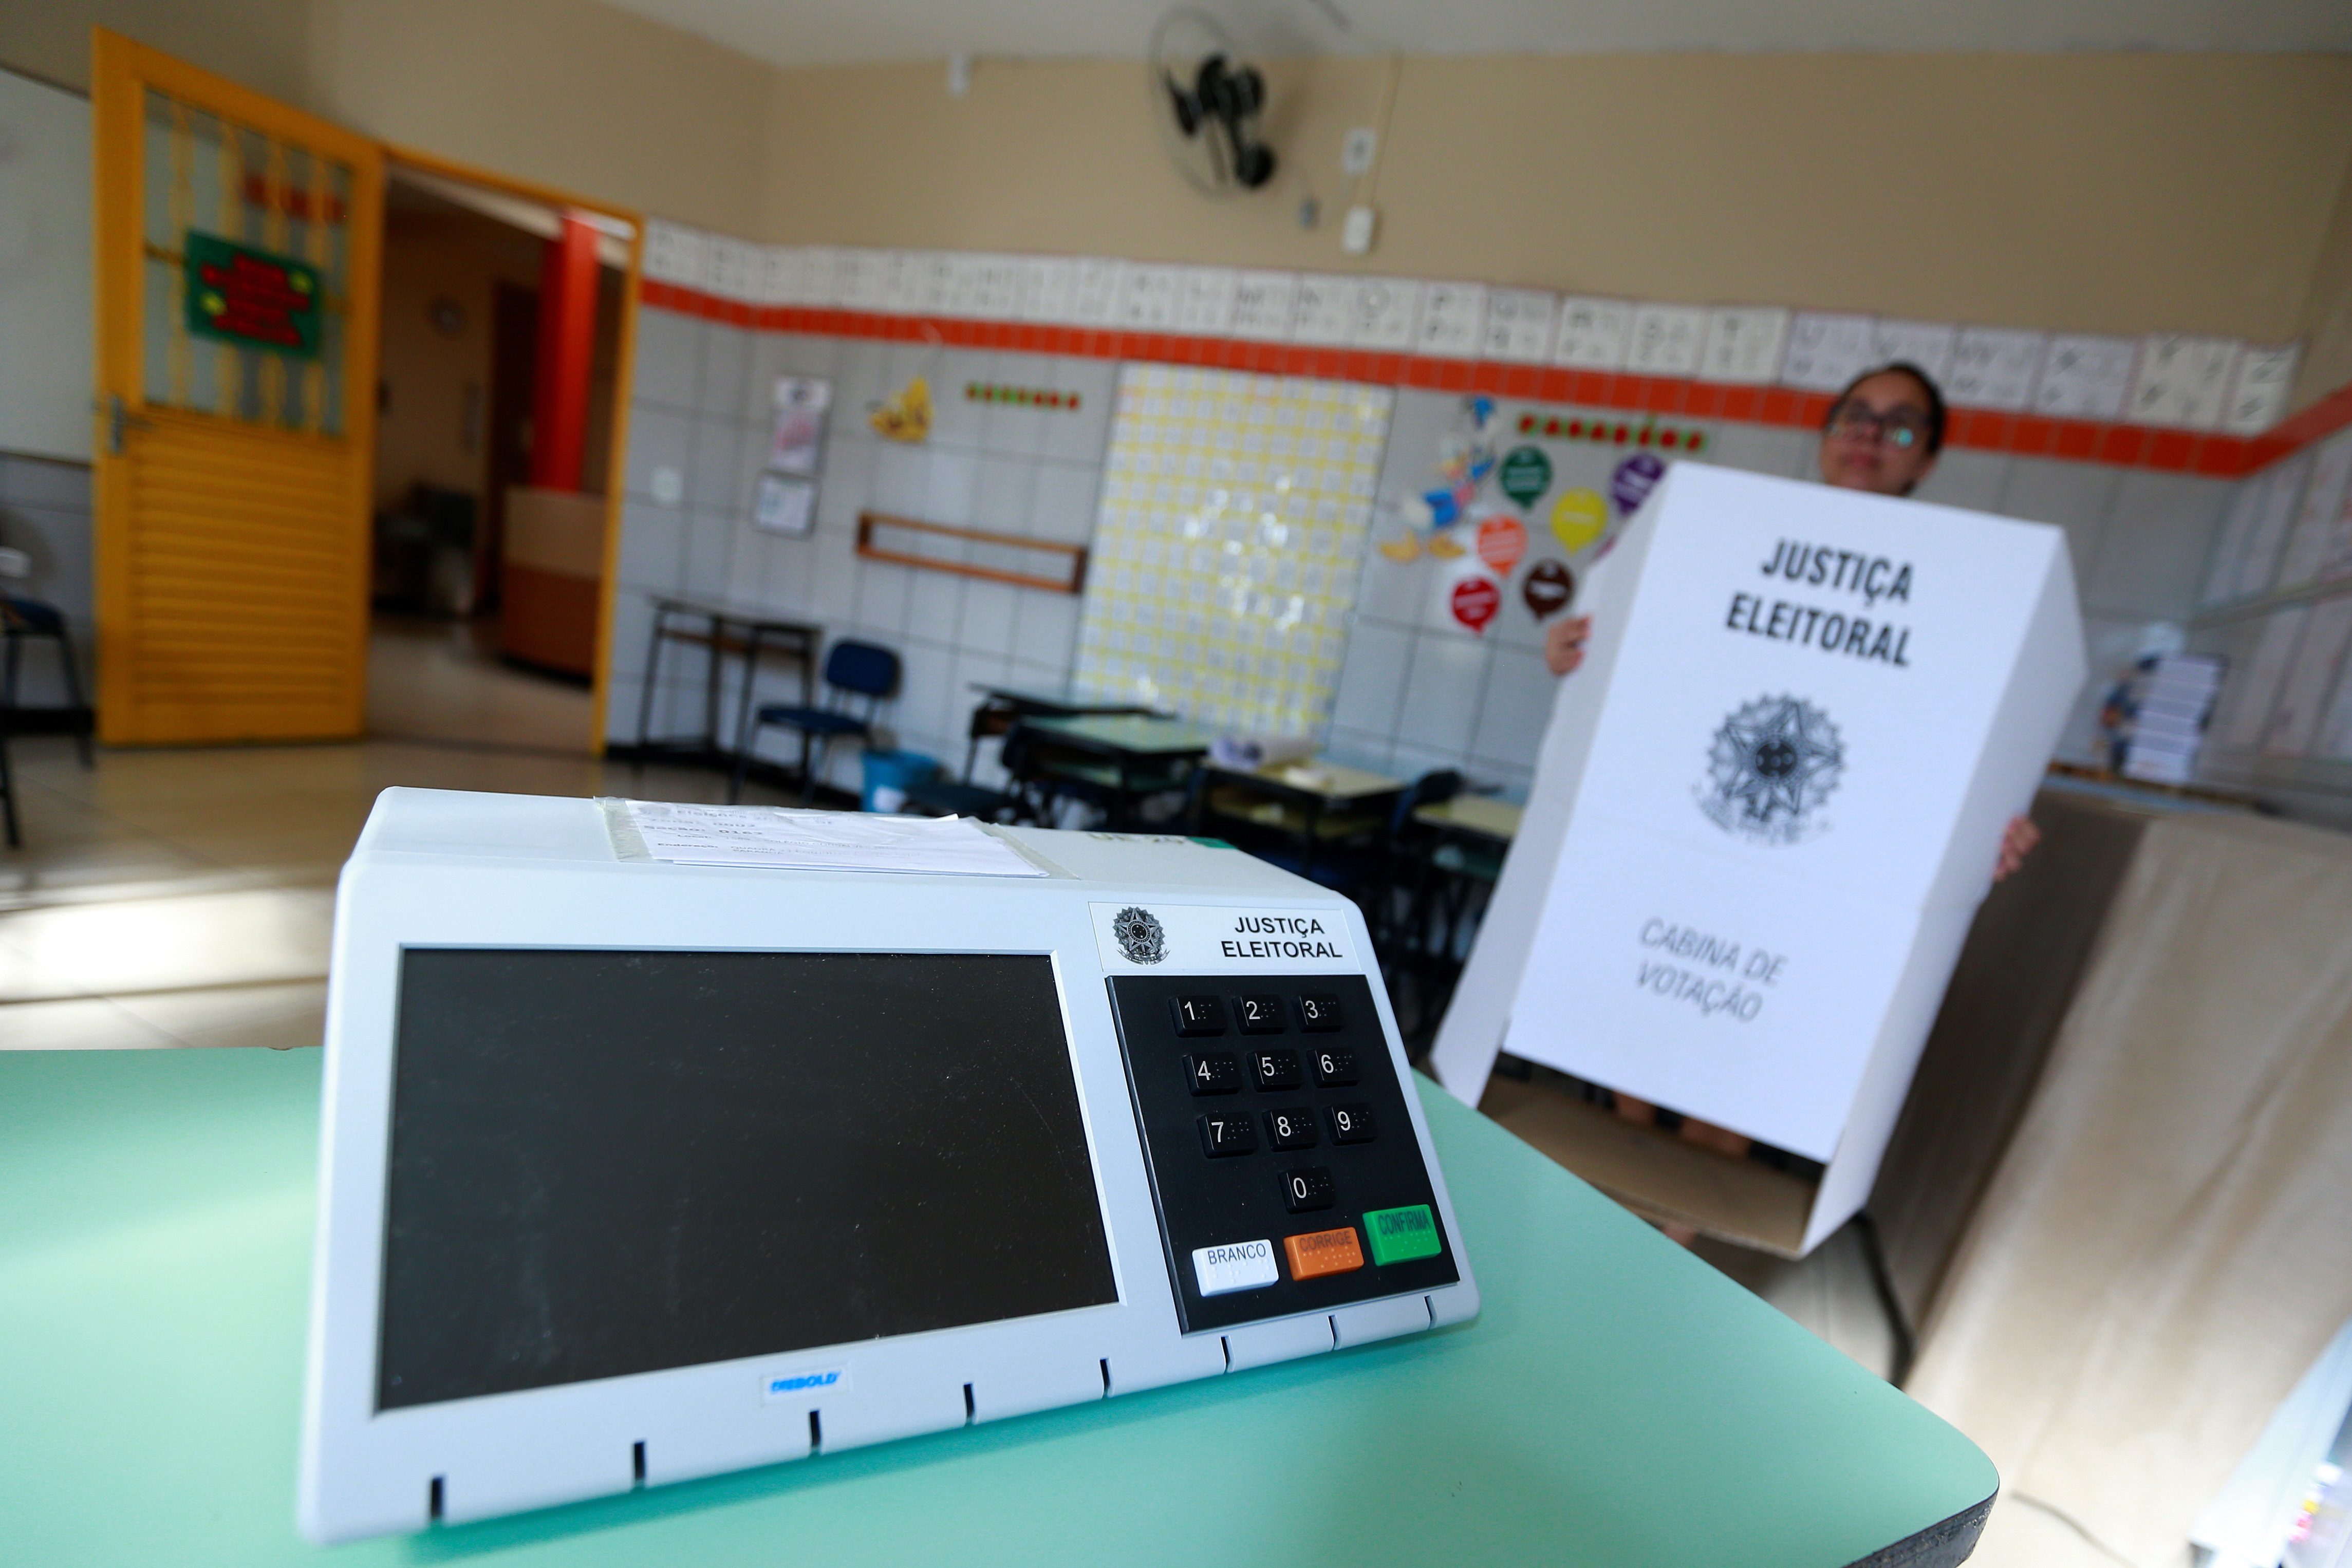 File photo of an electronic ballot box during election day at a school in Brasilia (EFE/Joédson Alves)